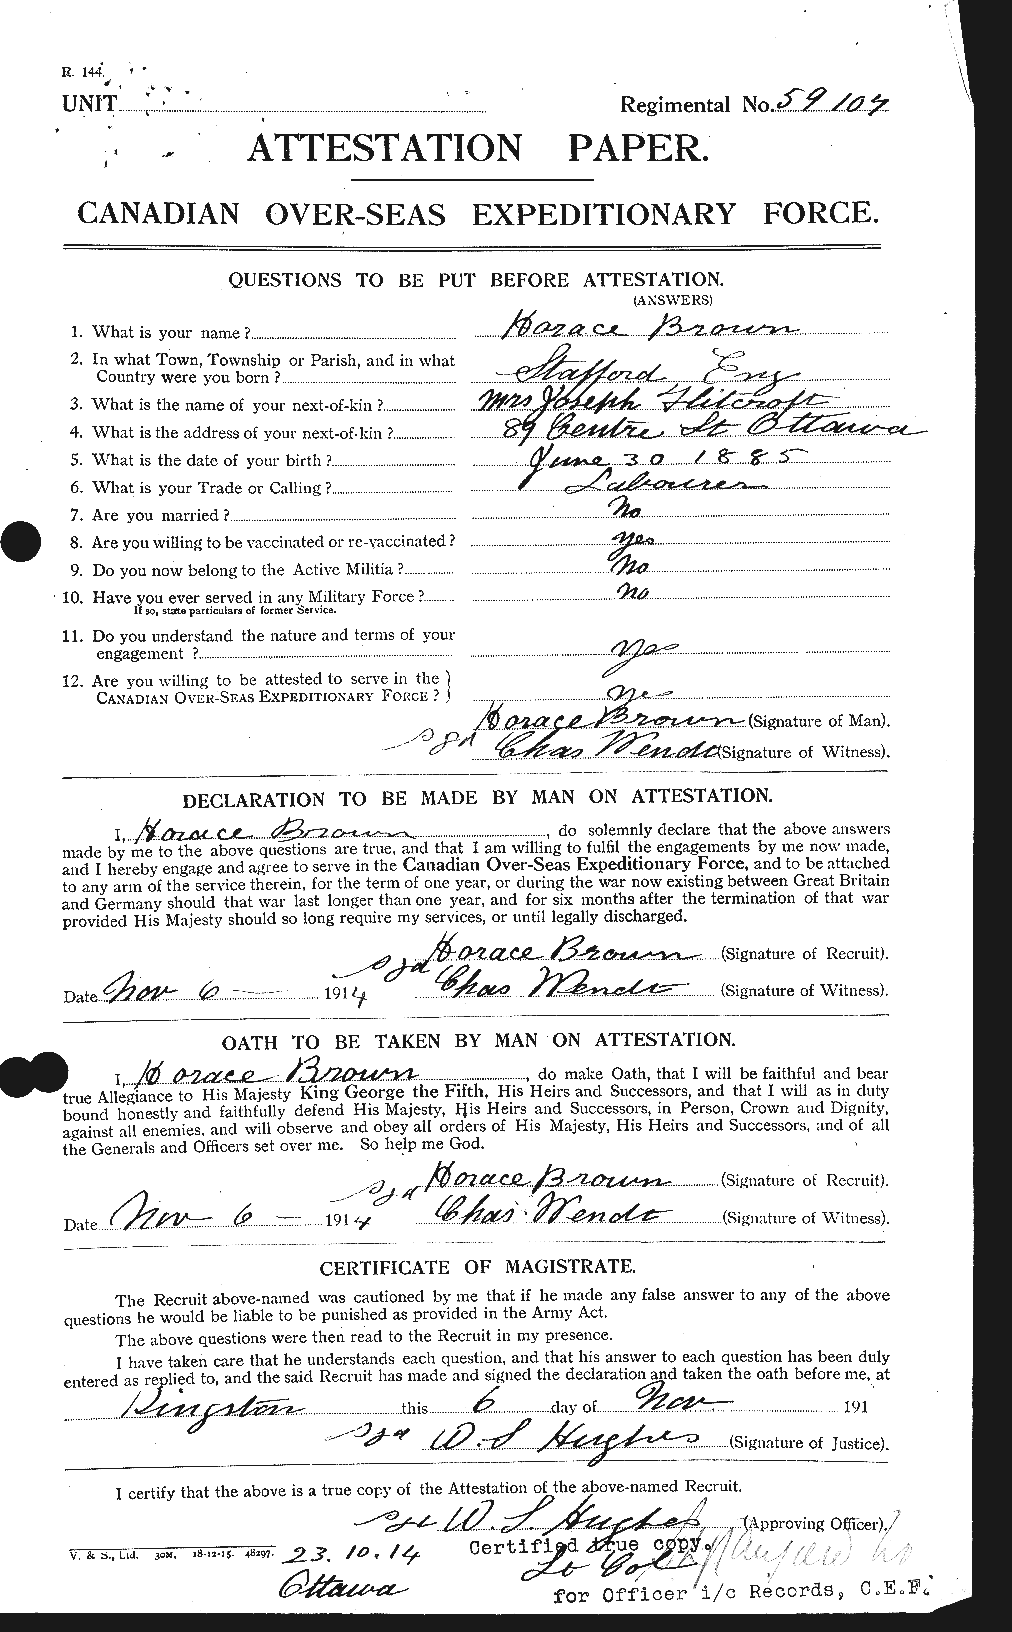 Personnel Records of the First World War - CEF 265605a